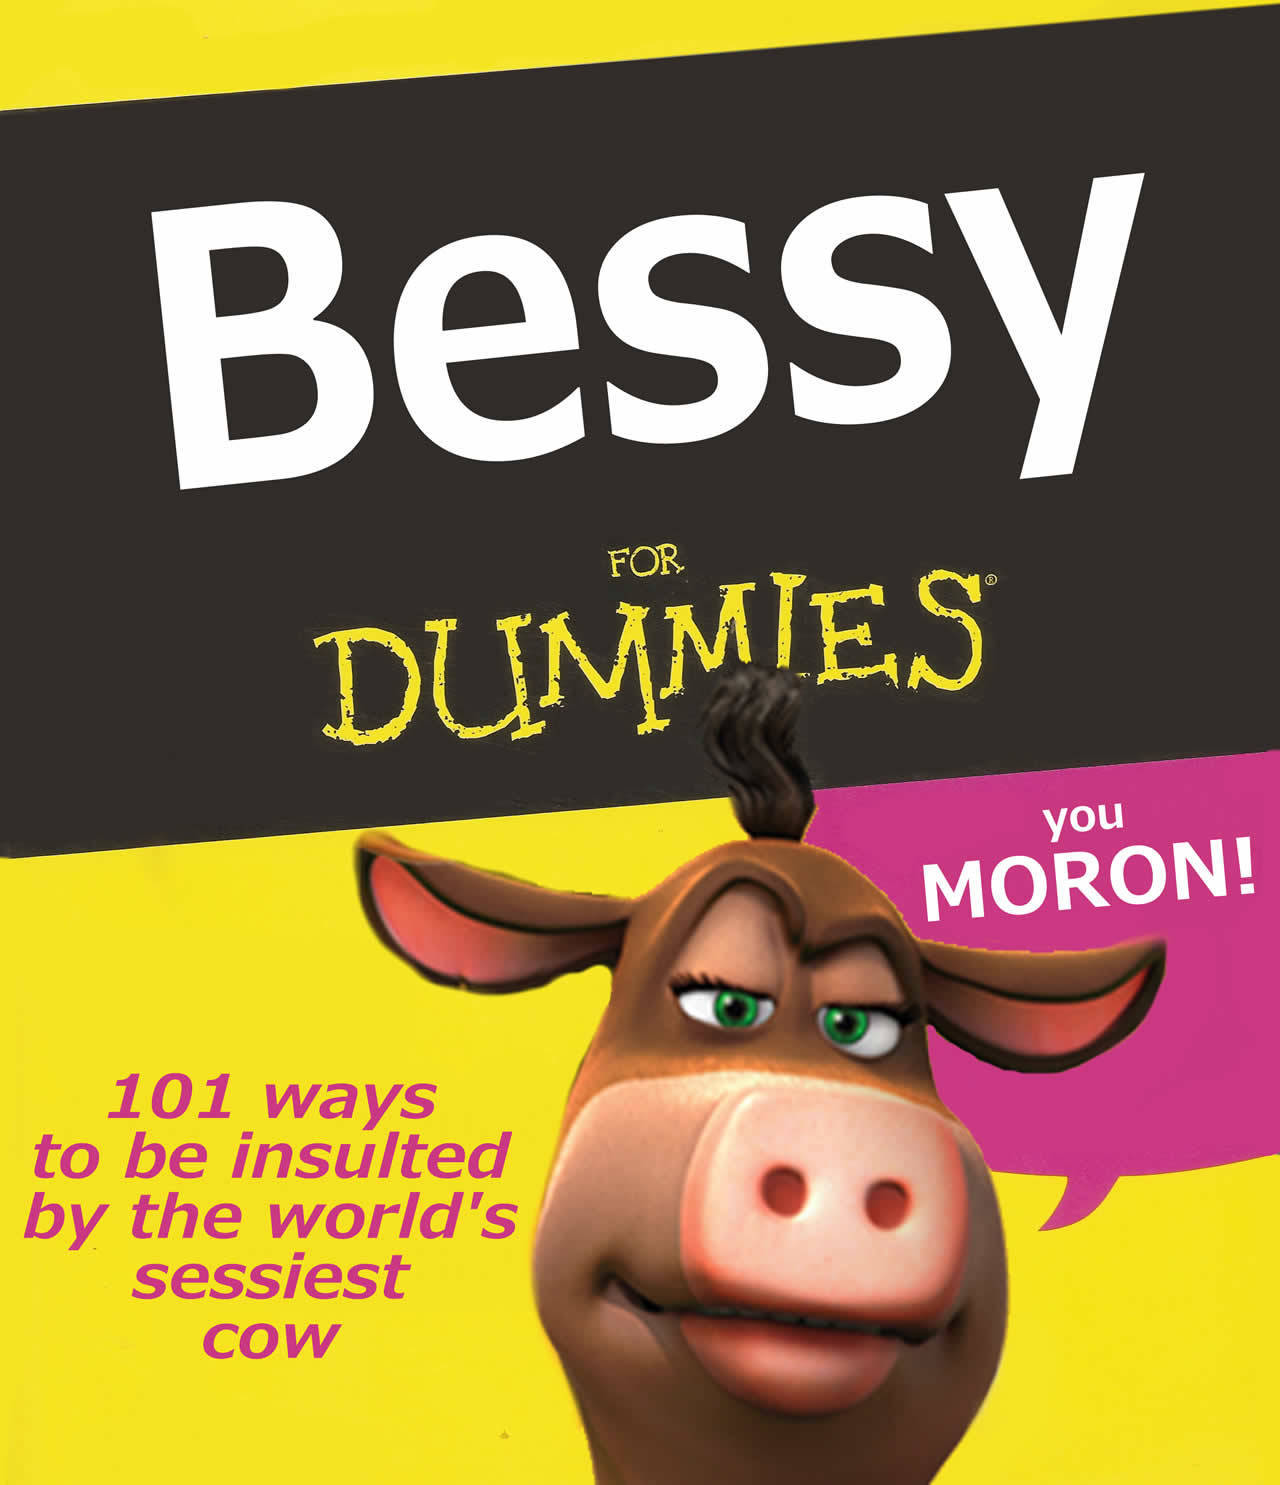 Back In The Barnyard Image Bessy For Dummies HD Wallpaper And